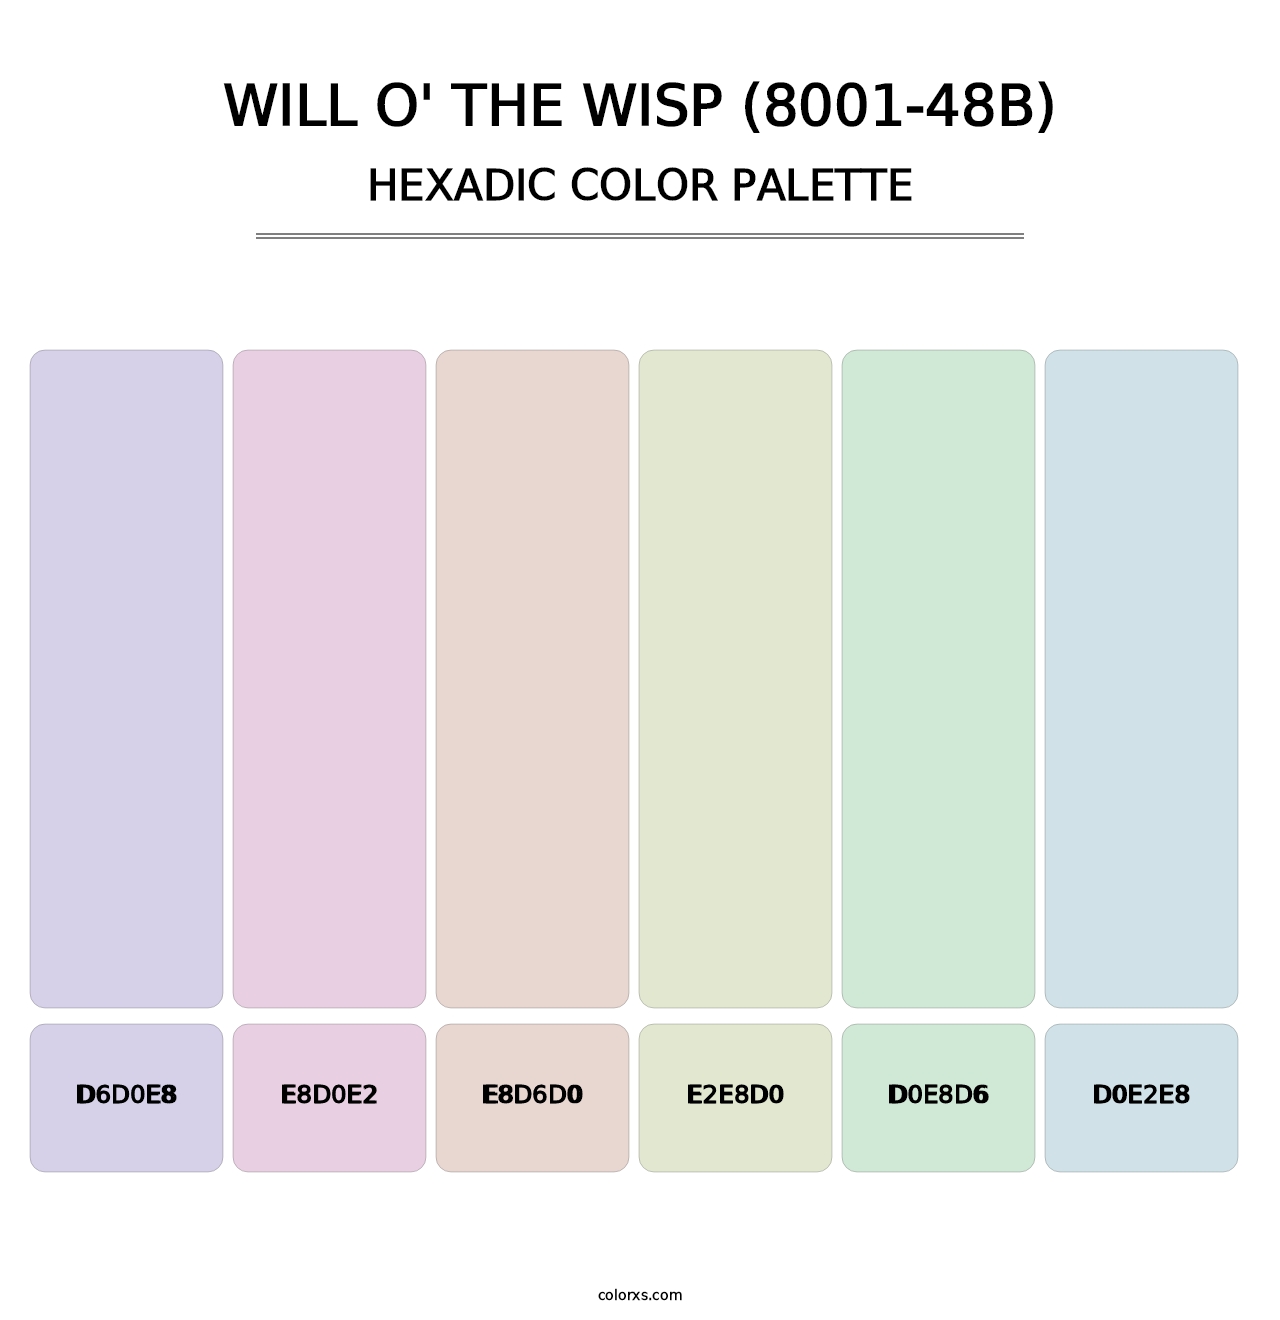 Will o' the Wisp (8001-48B) - Hexadic Color Palette